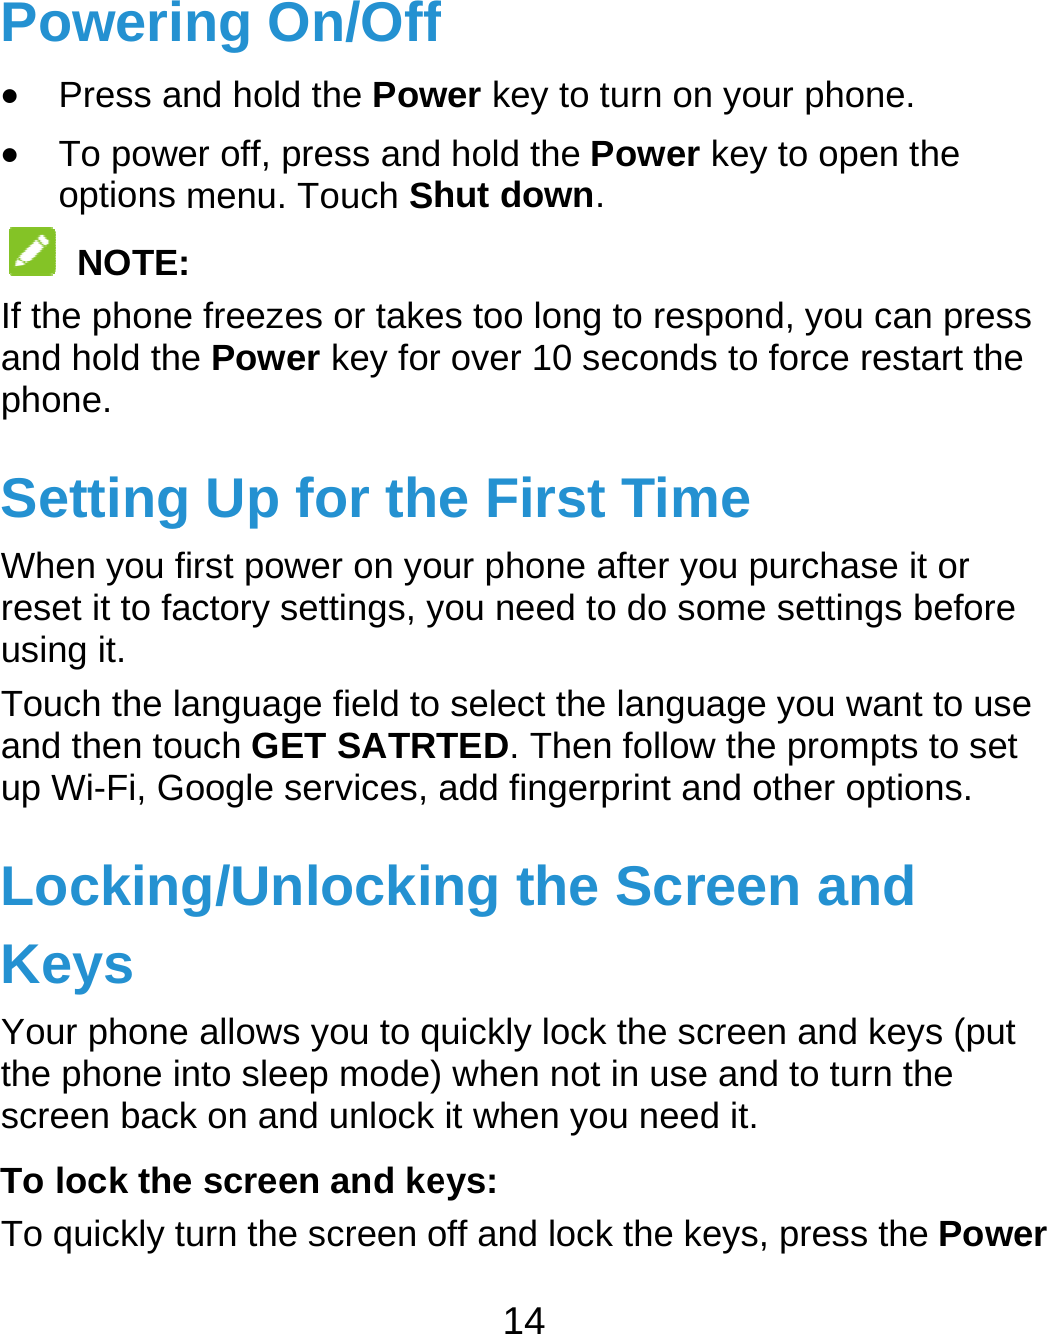  Poweri Press a To poweoptions  NOTEIf the phoneand hold thphone. SettingWhen you freset it to fausing it. Touch the land then toup Wi-Fi, GLockinKeys Your phonethe phone iscreen bacTo lock theTo quickly ting On/Offand hold the Power off, press andmenu. Touch Sh: e freezes or takee Power key forg Up for thefirst power on yoactory settings, yanguage field to ouch GET SATRTGoogle services, ag/Unlockine allows you to qnto sleep mode)k on and unlock e screen and keturn the screen o14 f wer key to turn on hold the Power hut down. es too long to resr over 10 secondse First Timour phone after yoyou need to do soselect the languTED. Then followadd fingerprint ang the Scruickly lock the sc when not in useit when you needeys: off and lock the kn your phone. key to open the spond, you can ps to force restartme ou purchase it orome settings befuage you want to w the prompts to nd other optionsreen and creen and keys (e and to turn the d it. eys, press the Press the r fore use set . (put ower 